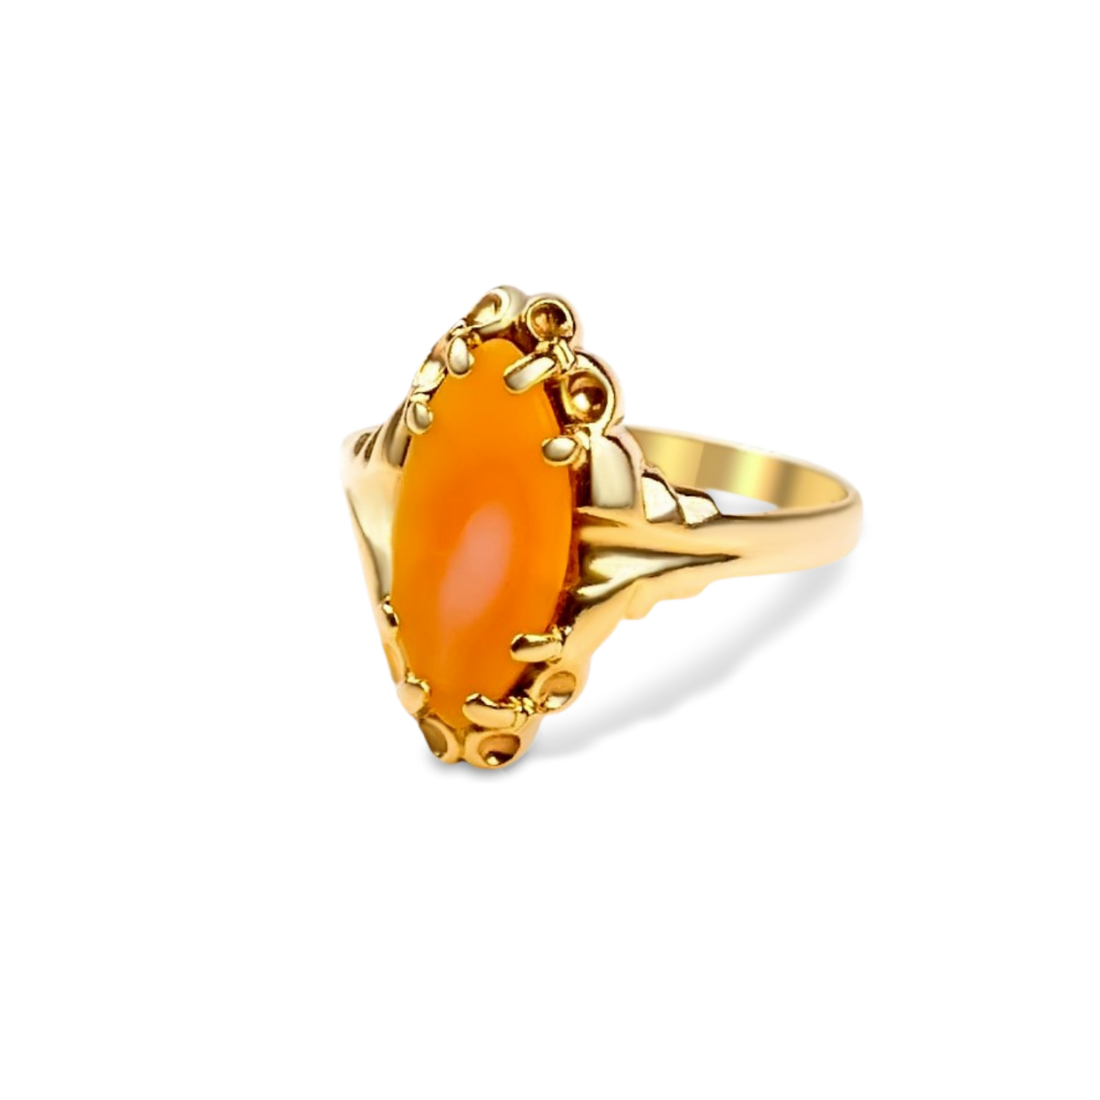 womens gold coral ring, 10k gold womens ring, antique vintage gold coral ring toronto, womens gold rings toronto